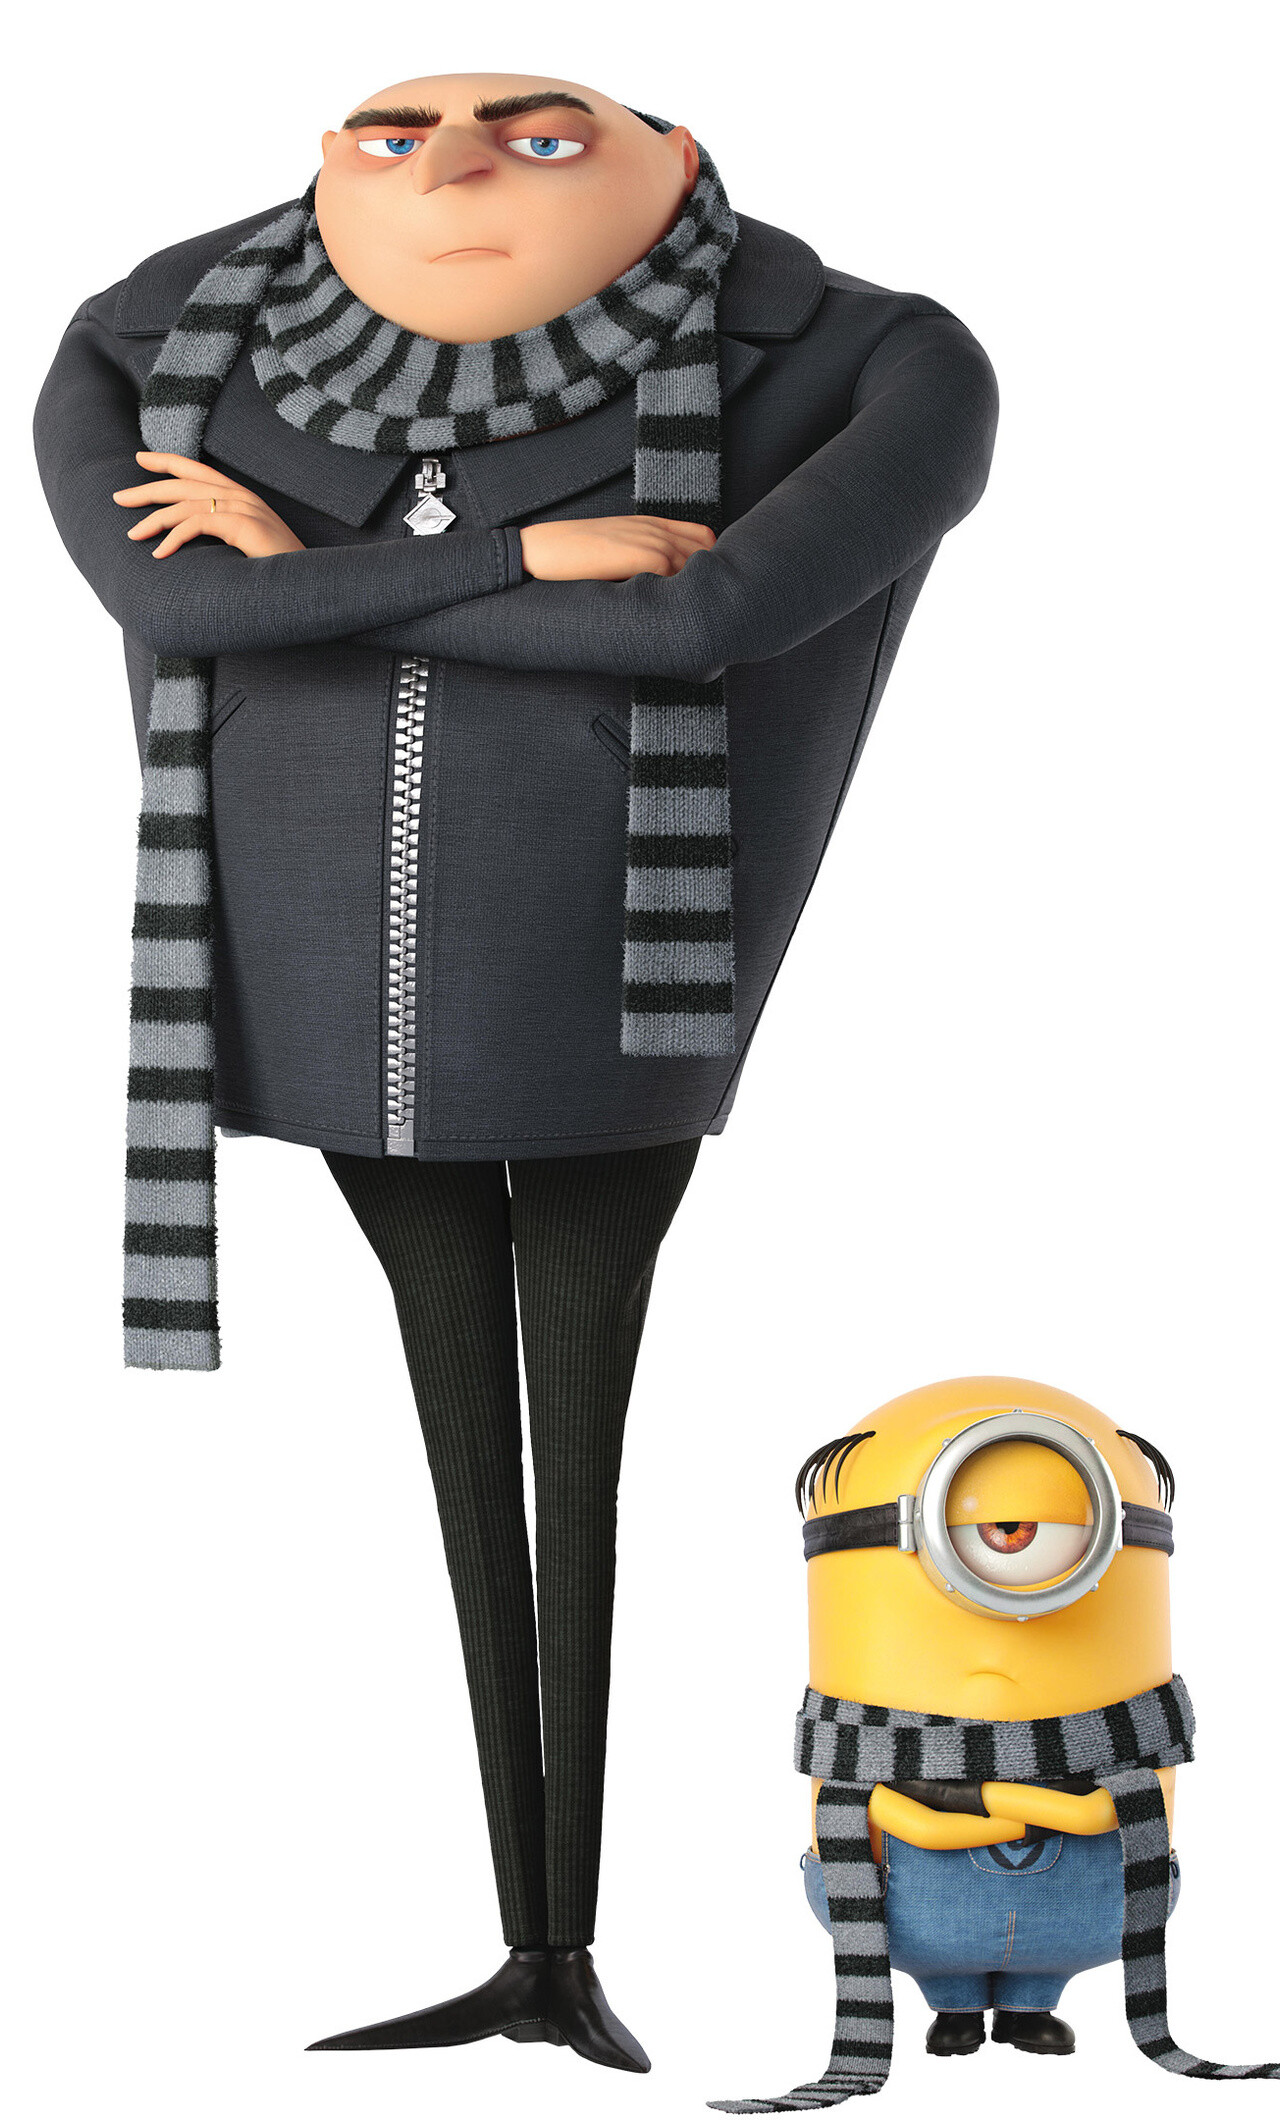 Despicable Me: The film stars the voices of Steve Carell, Kristen Wiig, Trey Parker, Coffin, Miranda Cosgrove, and Julie Andrews. 1280x2120 HD Background.